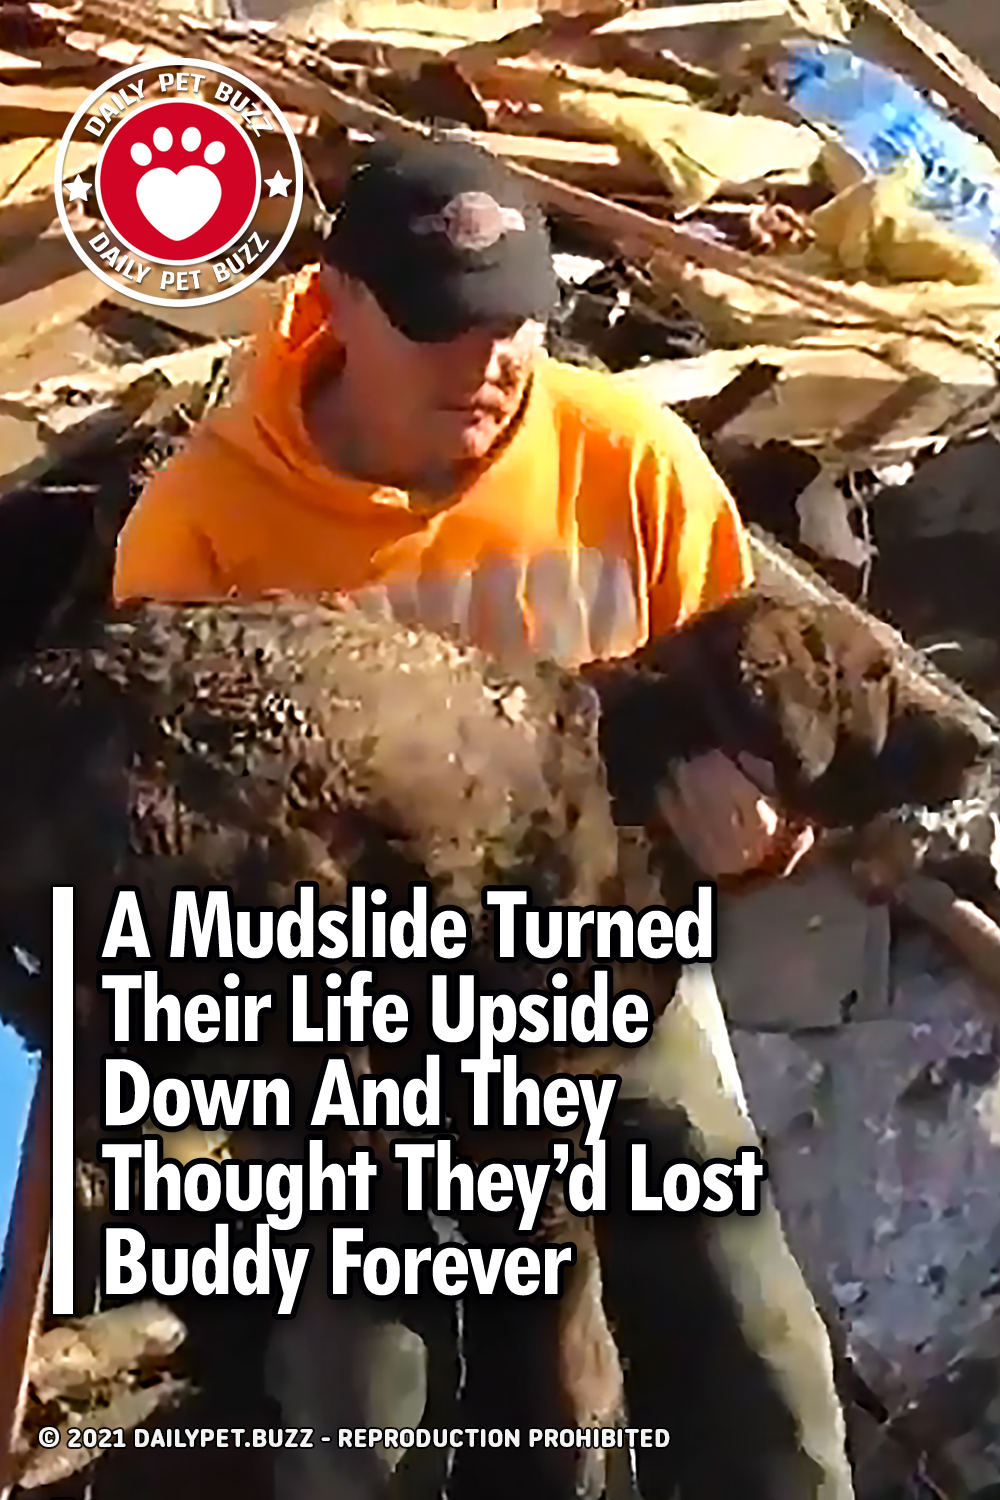 A Mudslide Turned Their Life Upside Down And They Thought They\'d Lost Buddy Forever